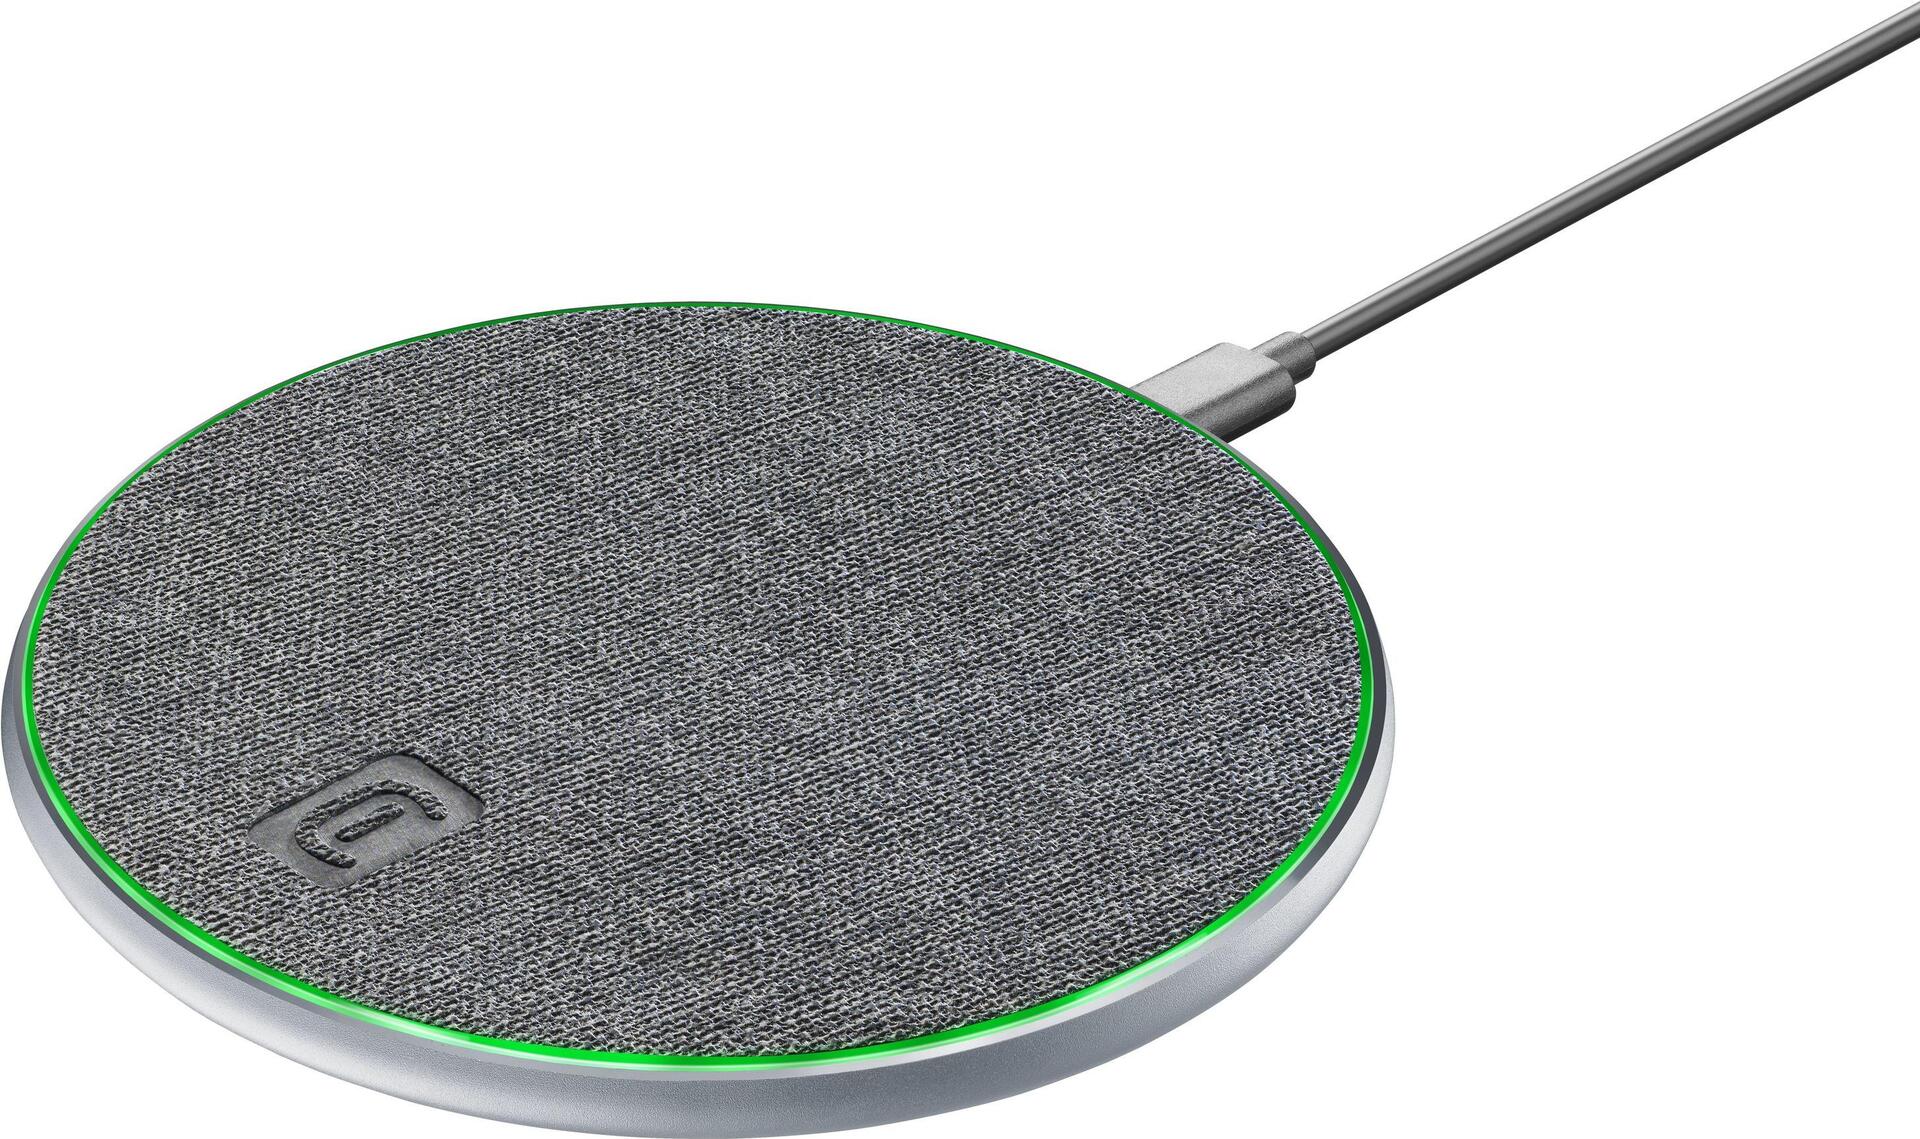 Cellularline Tweed wireless charger 15W (60308)